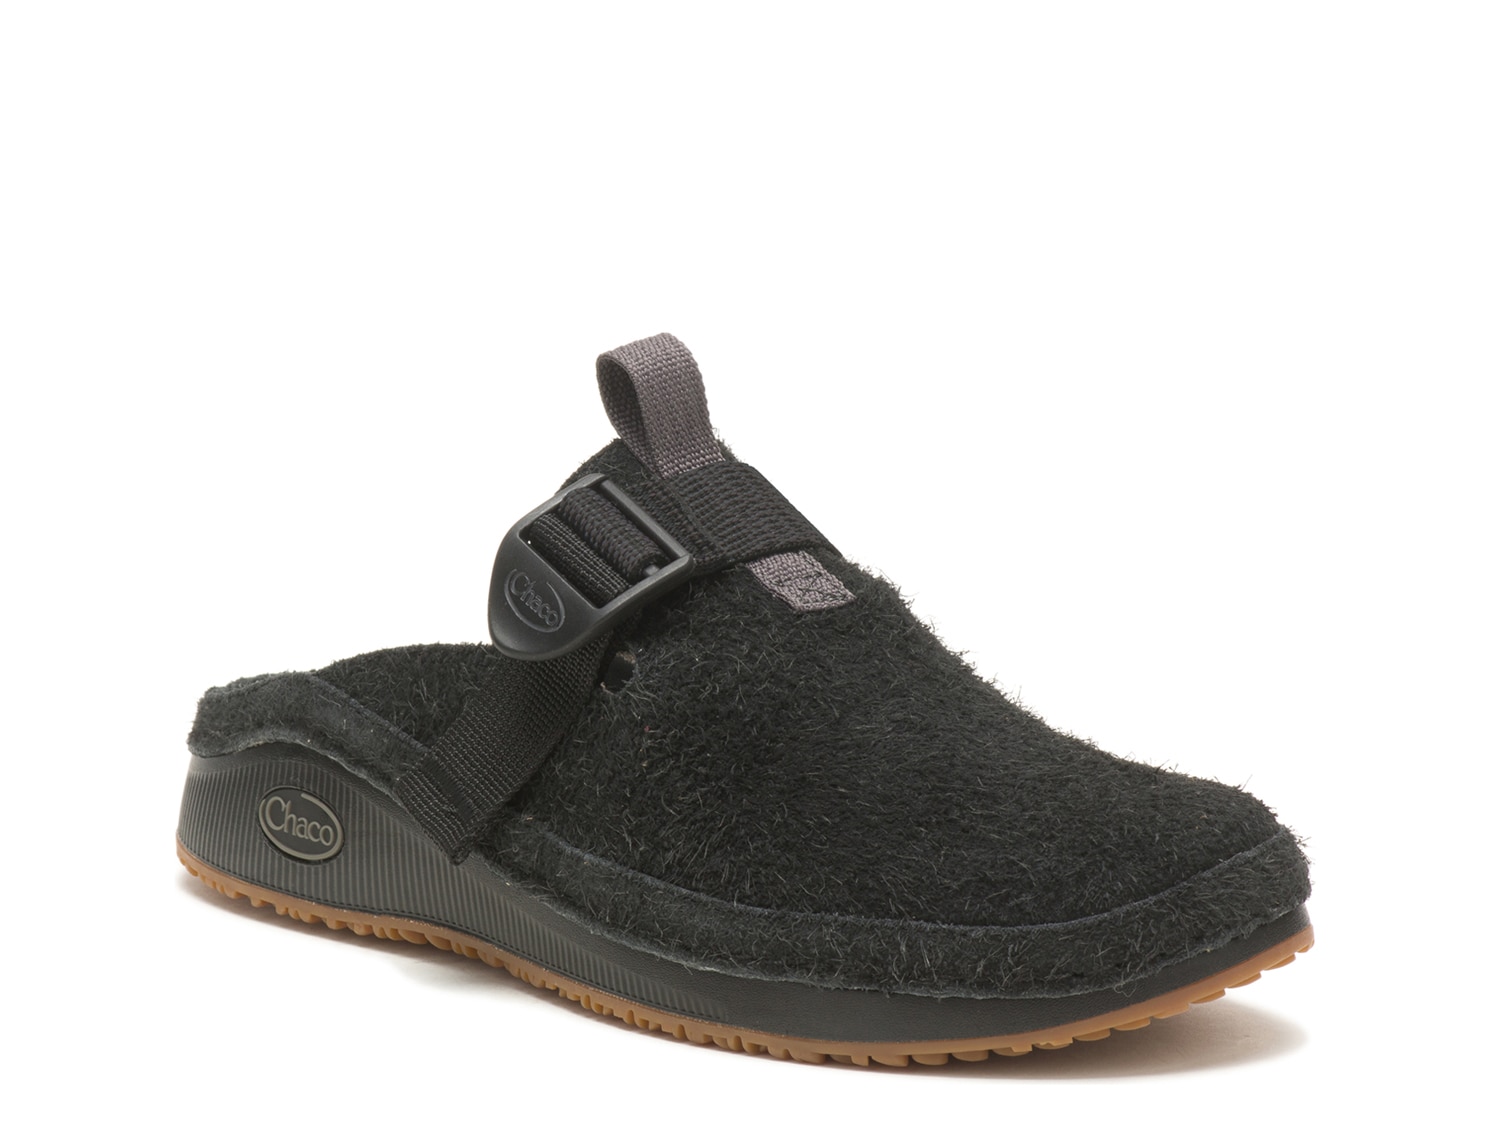 Chaco Paonia Clog - Free Shipping | DSW